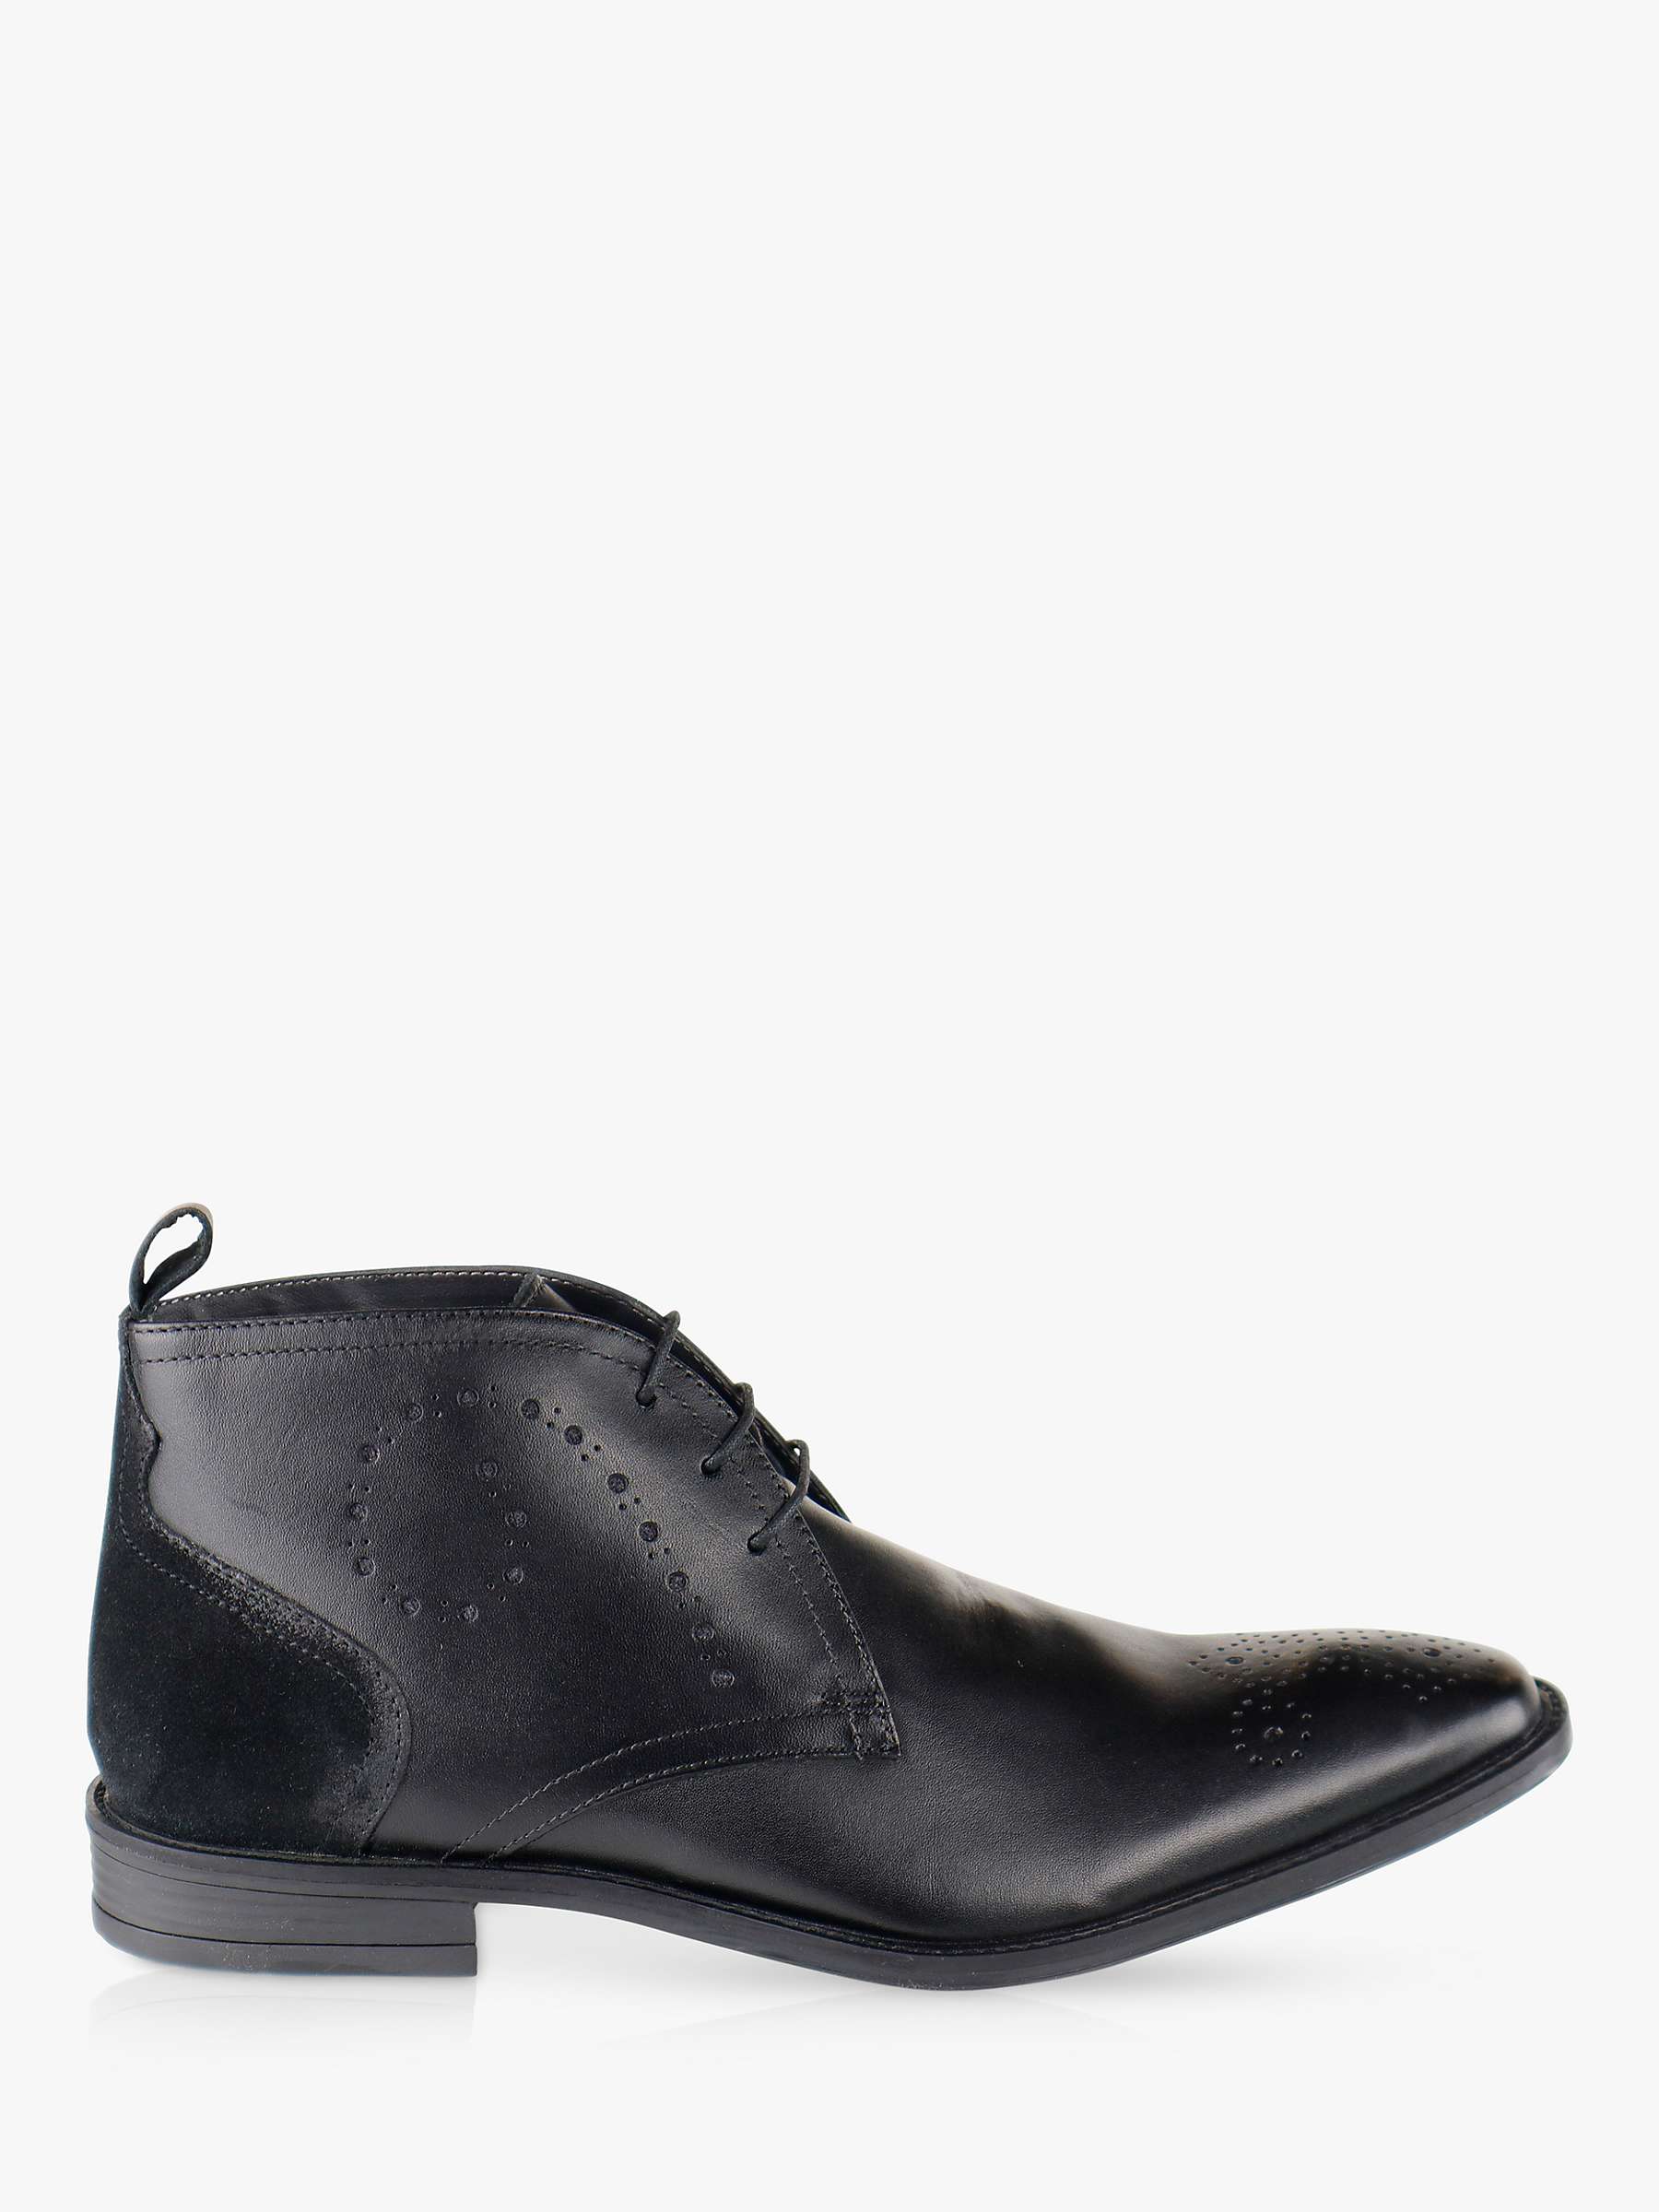 Buy Silver Street London Pembroke Leather Boots Online at johnlewis.com